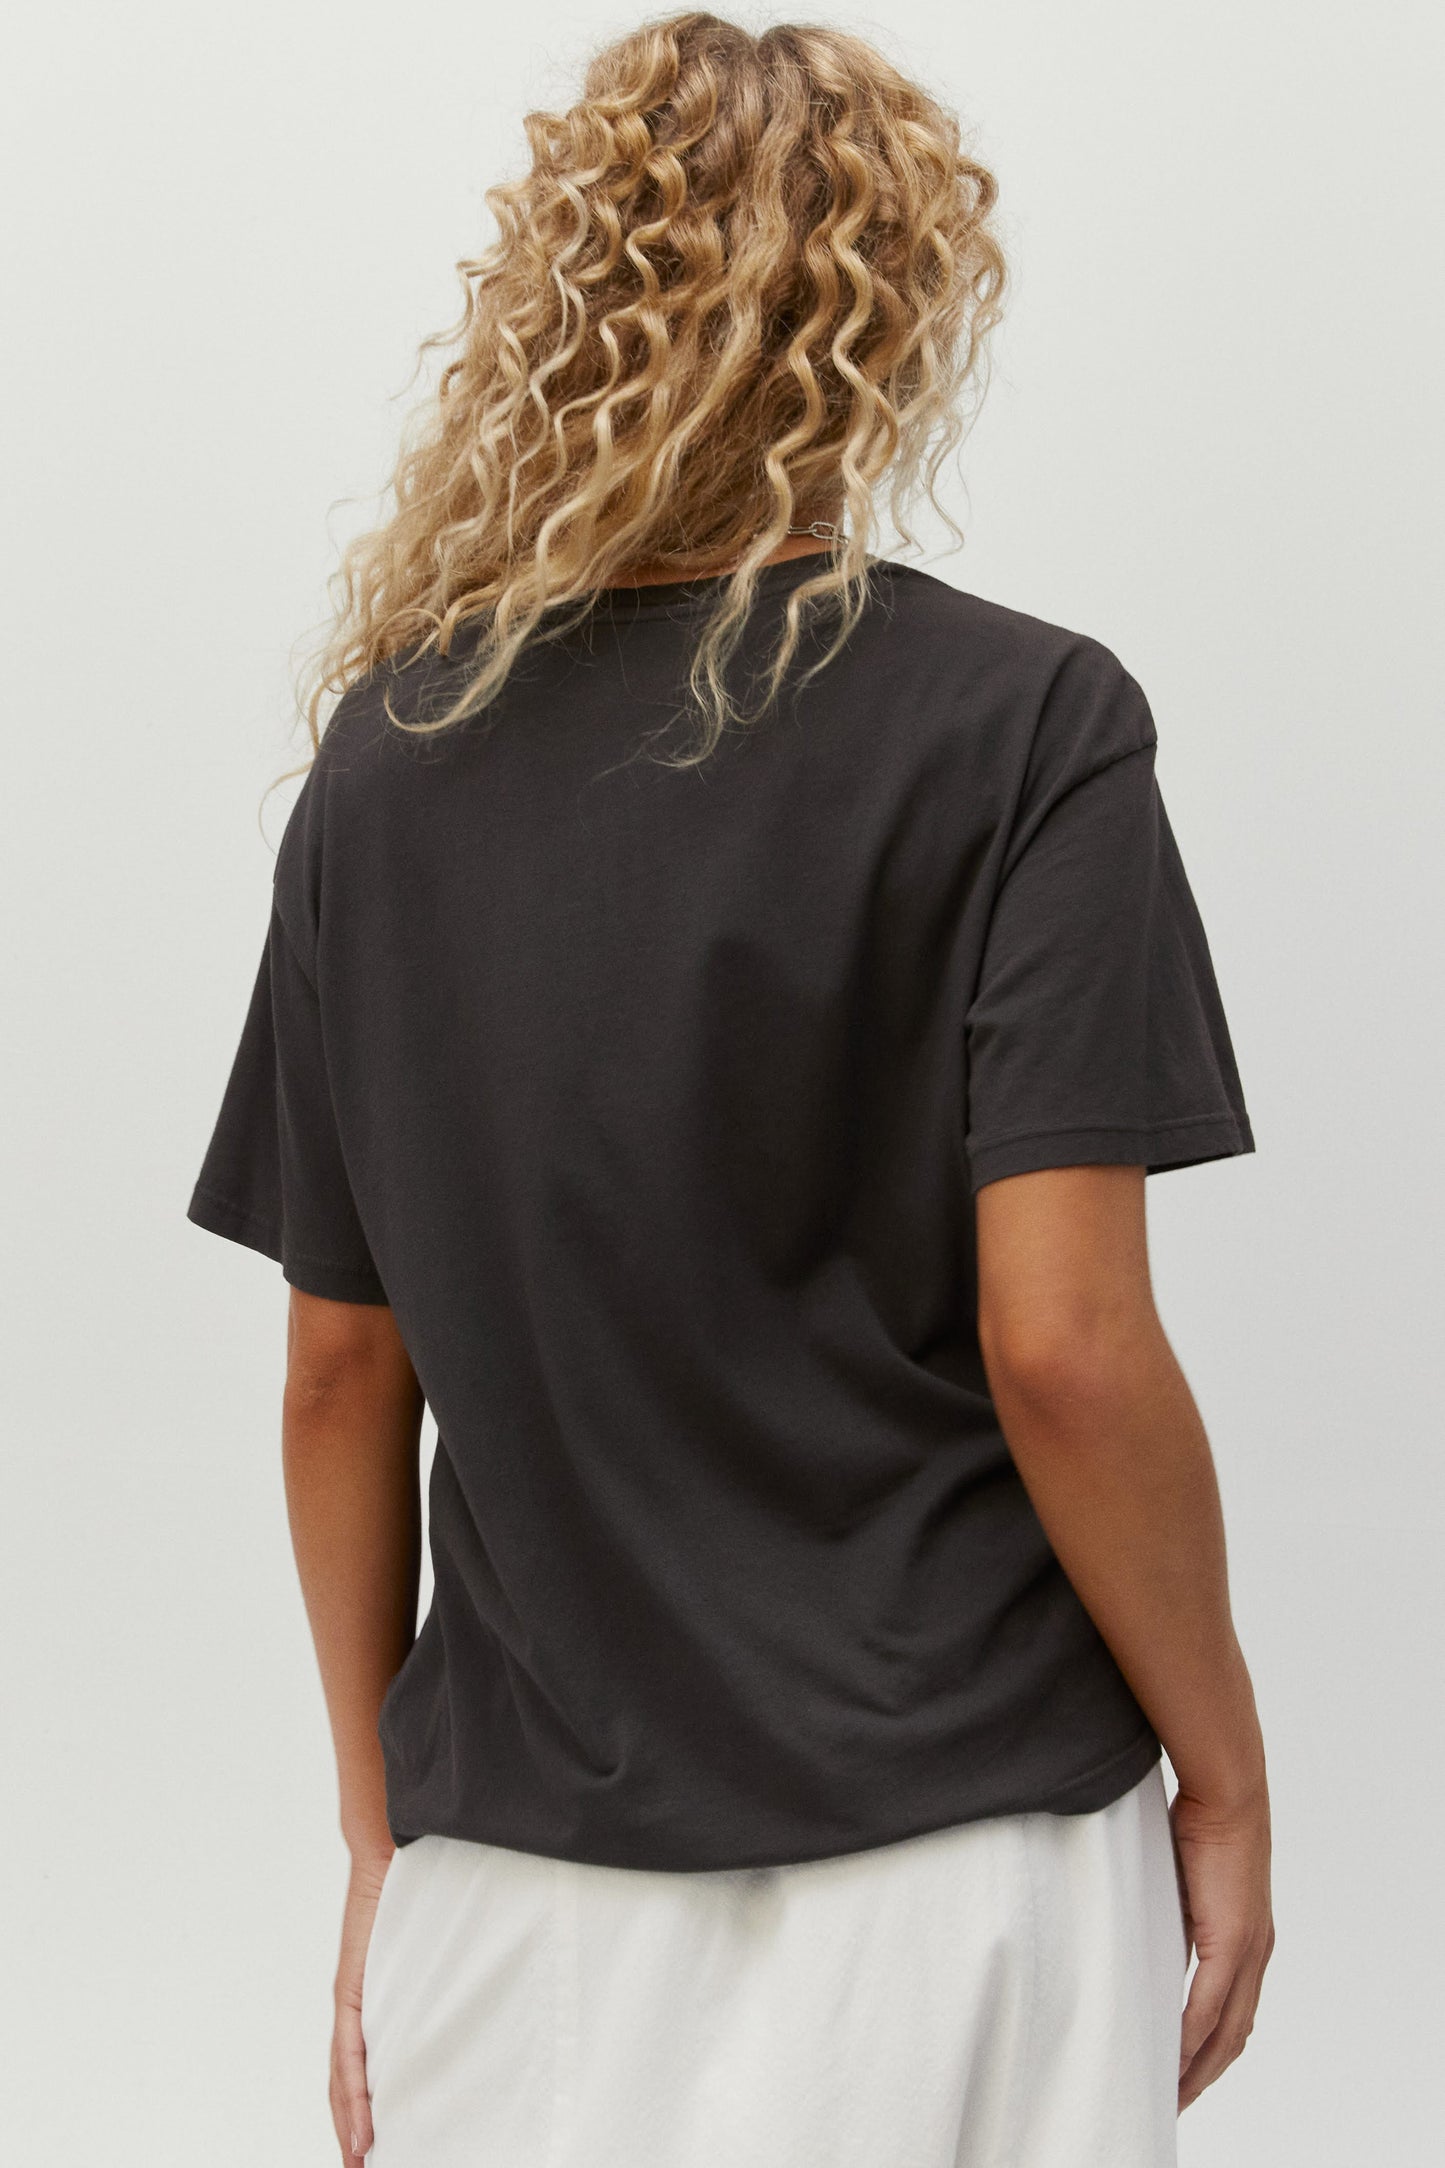 back tee designed with a portrait of the leading lady